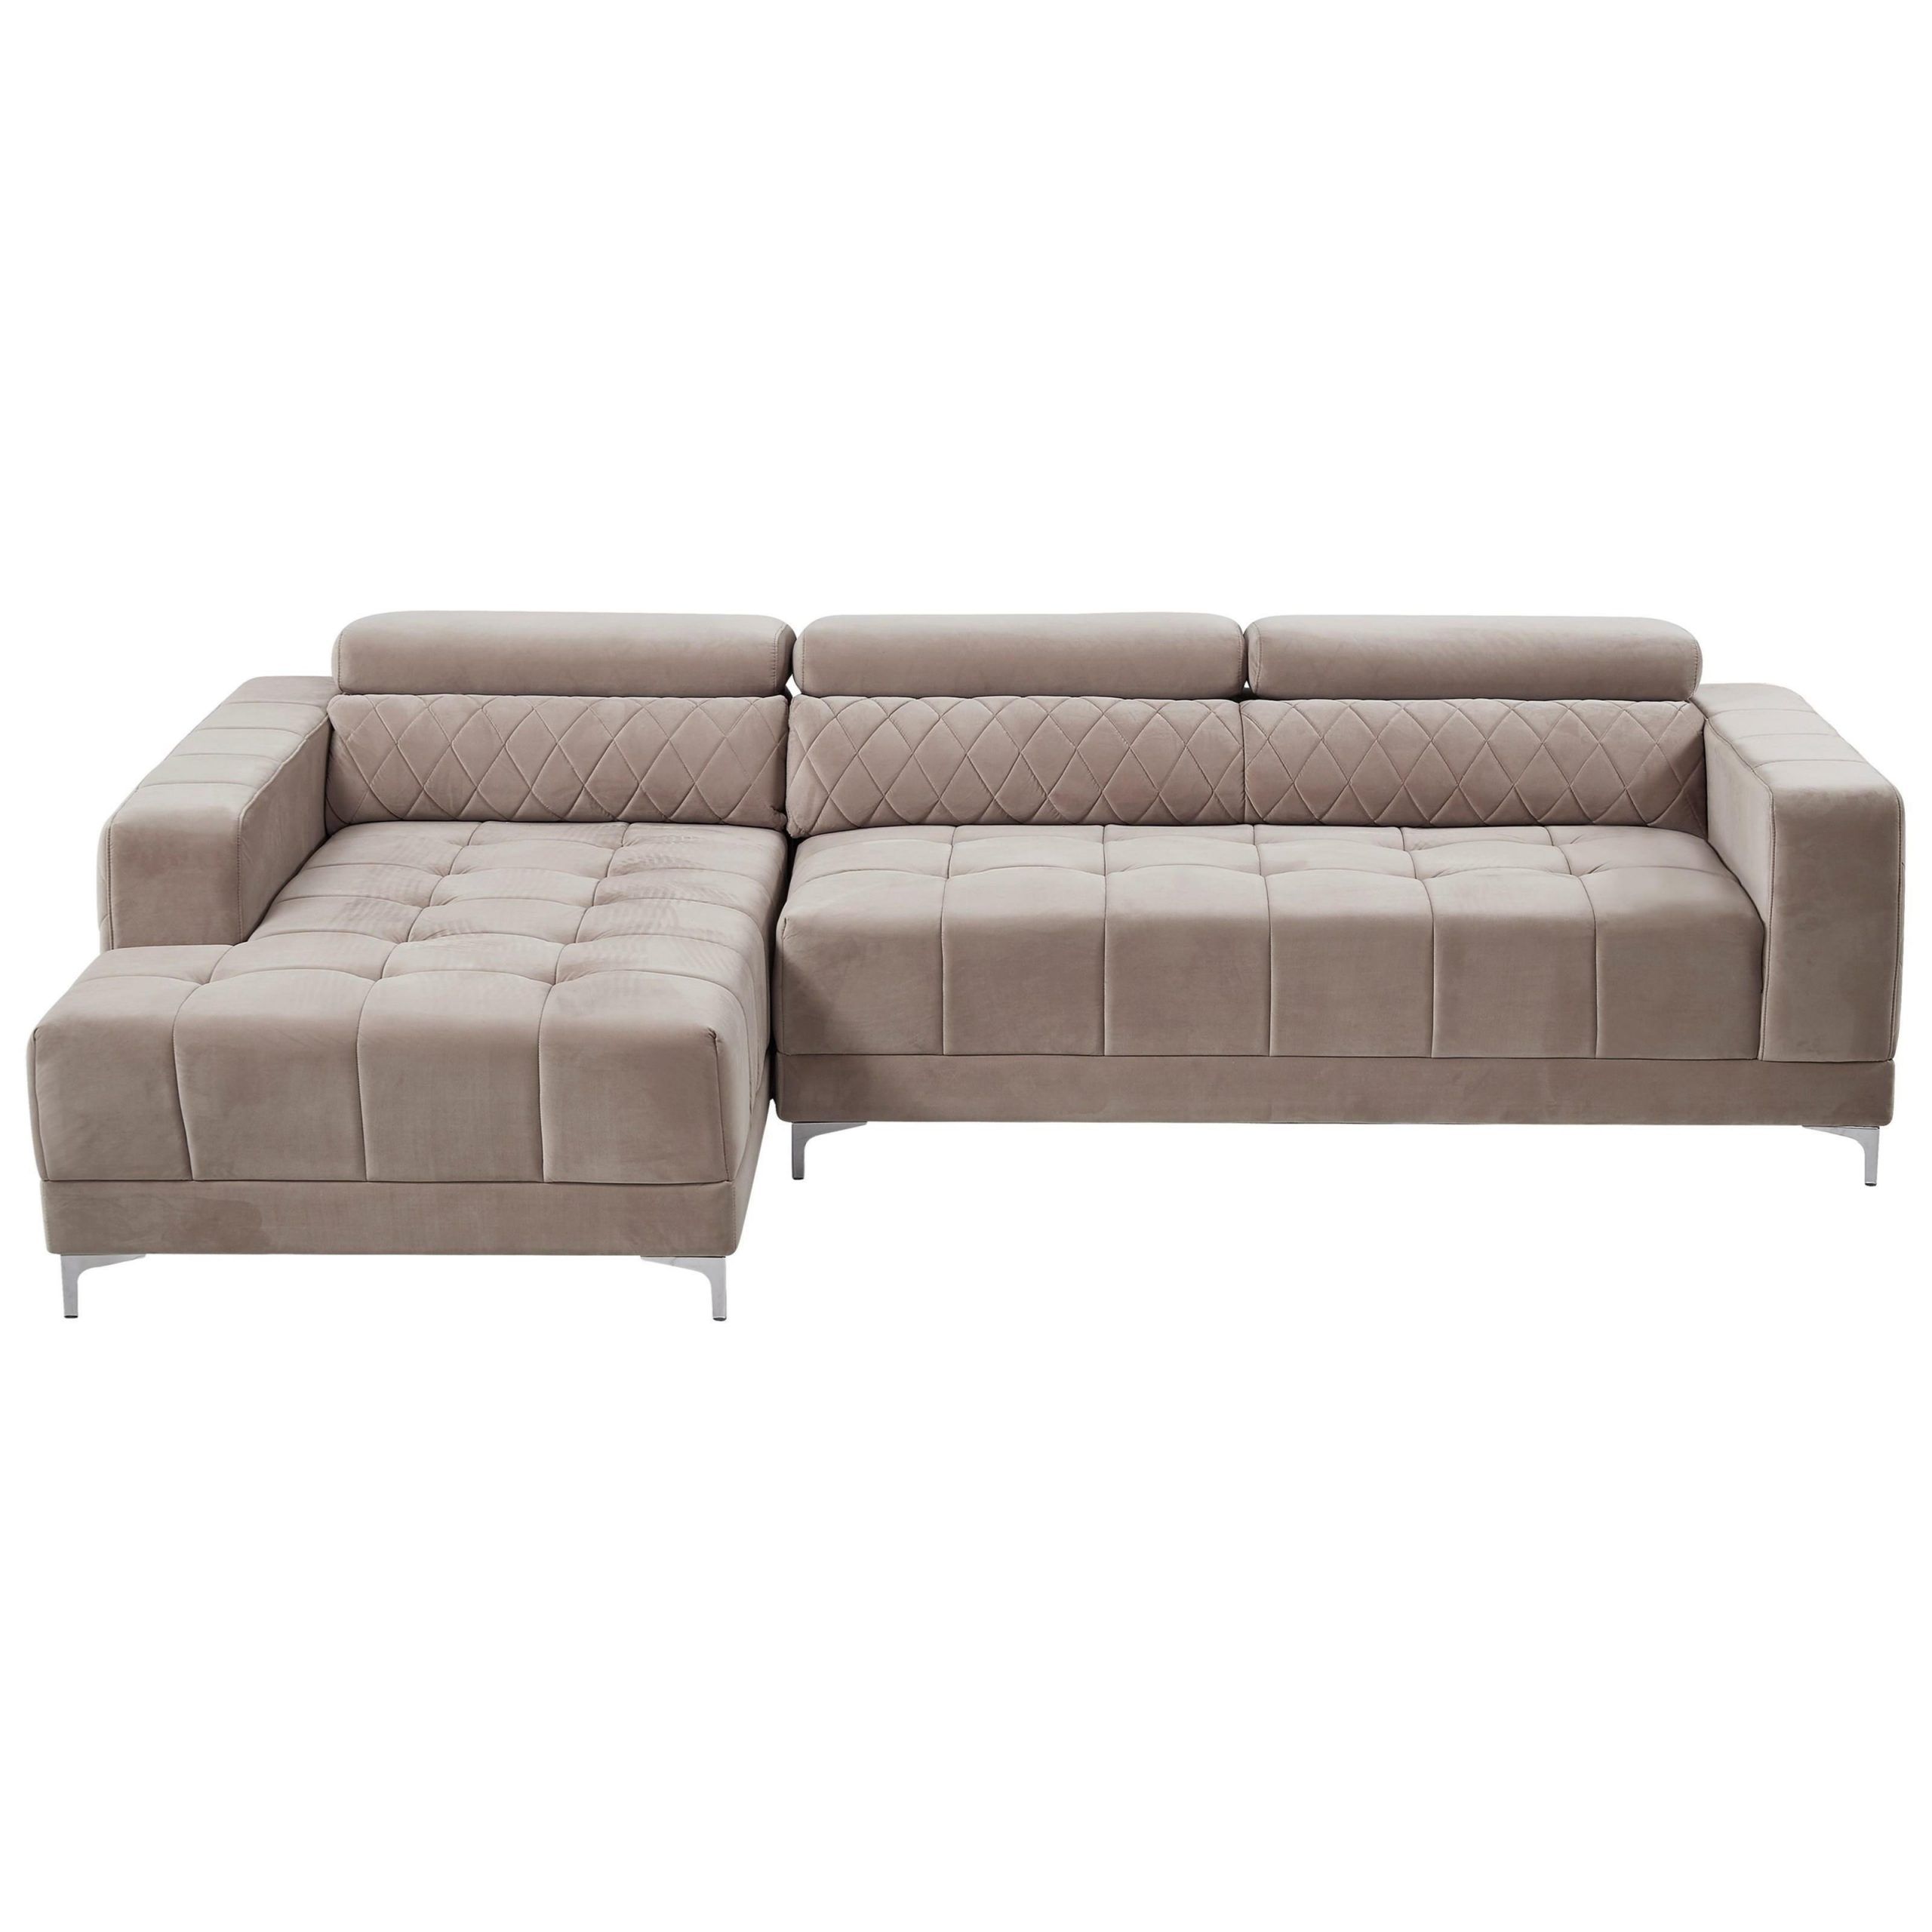 Global Furniture U0037 Contemporary 2 Piece Sectional With Pertaining To Current 2pc Burland Contemporary Sectional Sofas Charcoal (View 6 of 20)